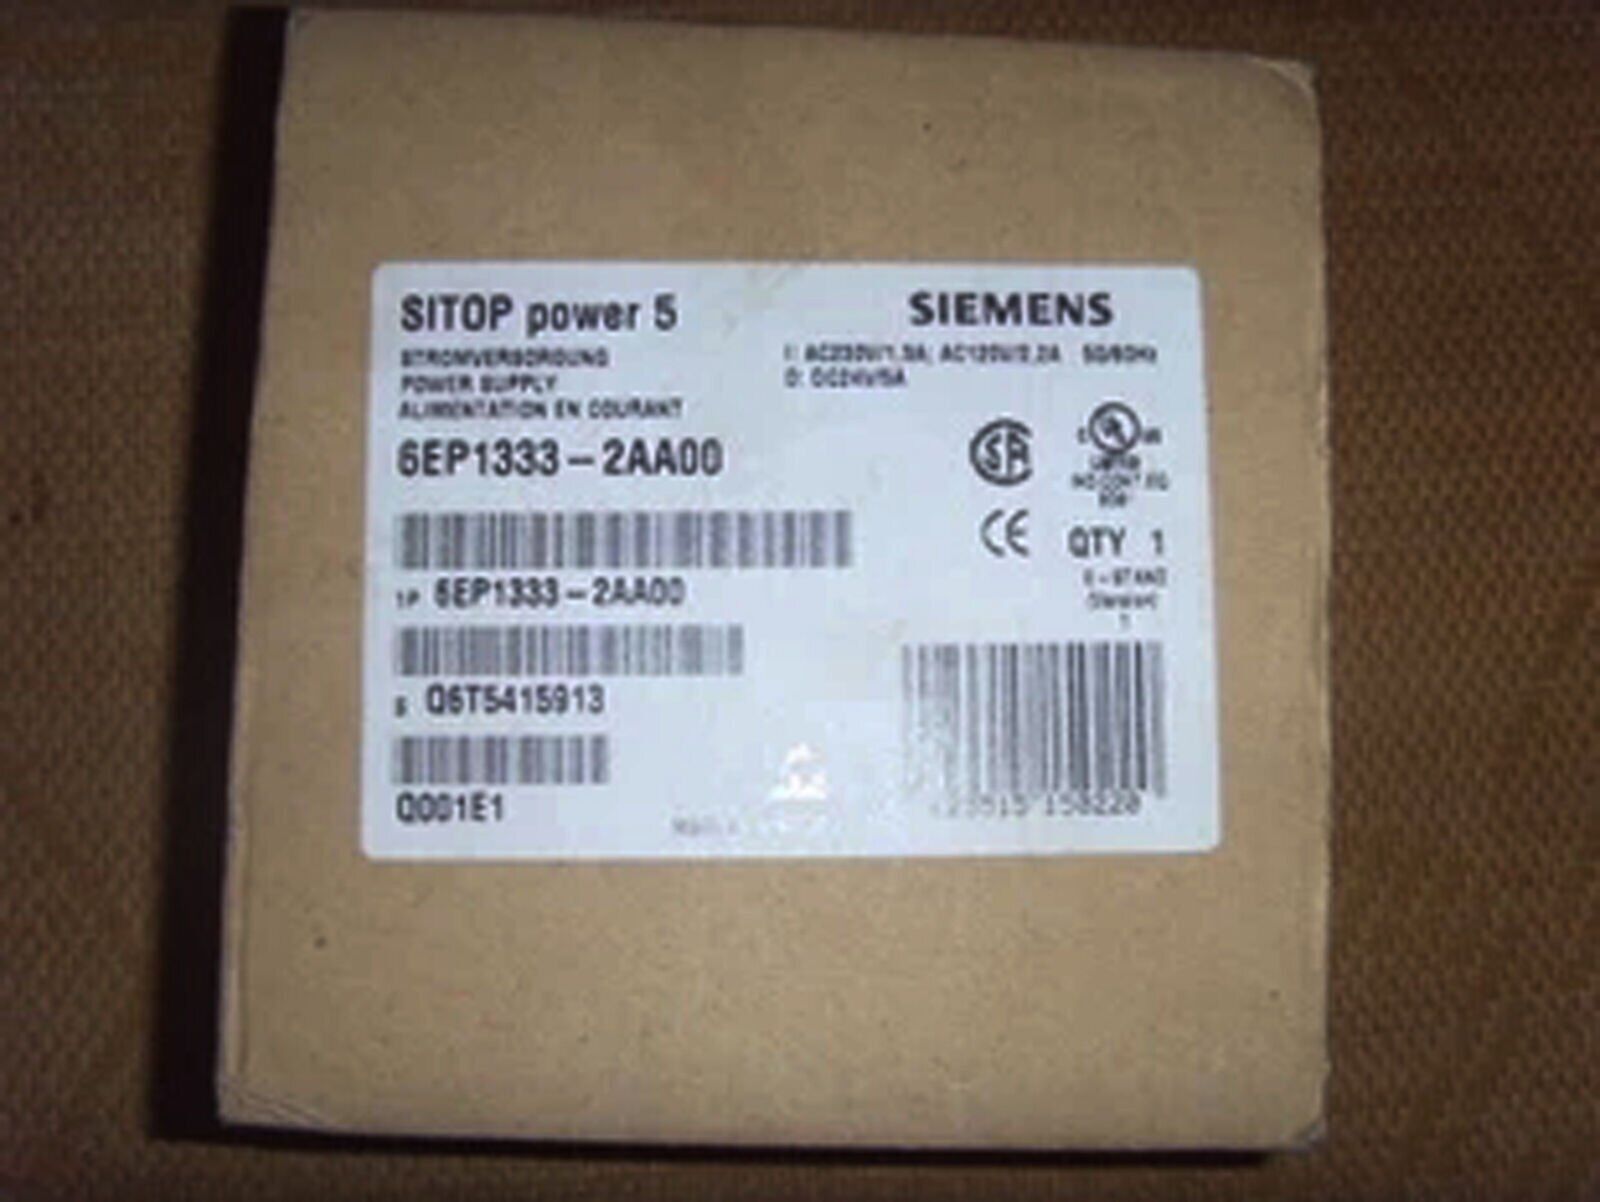 new ONE  Siemens Power Supply 6EP1333-2AA00 SITOP POWER One year